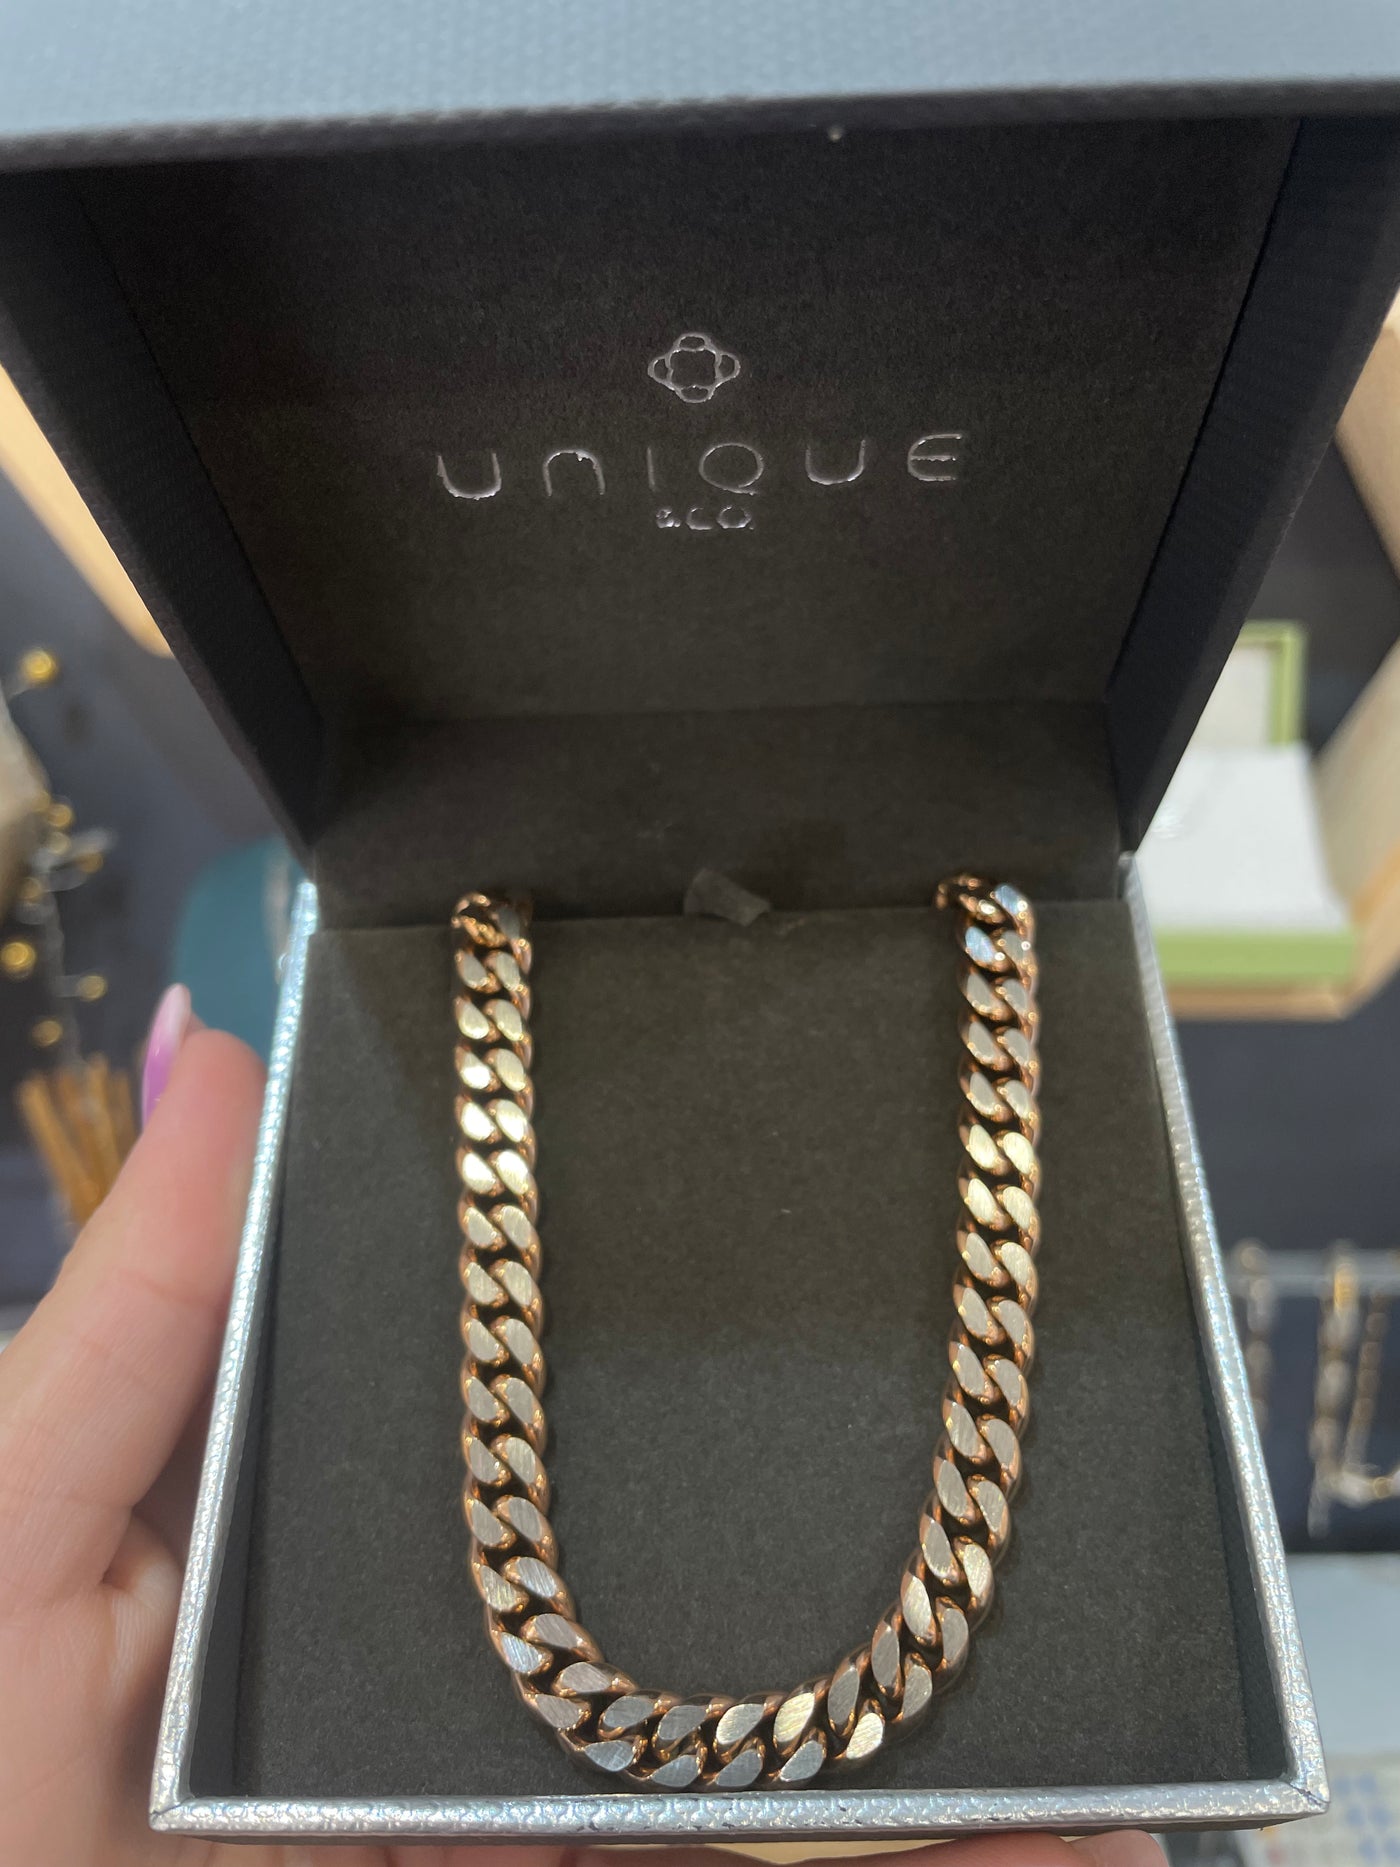 Unique & Co Stainless Rose Gold Or Steel Curb Chain Necklace - Rococo Jewellery